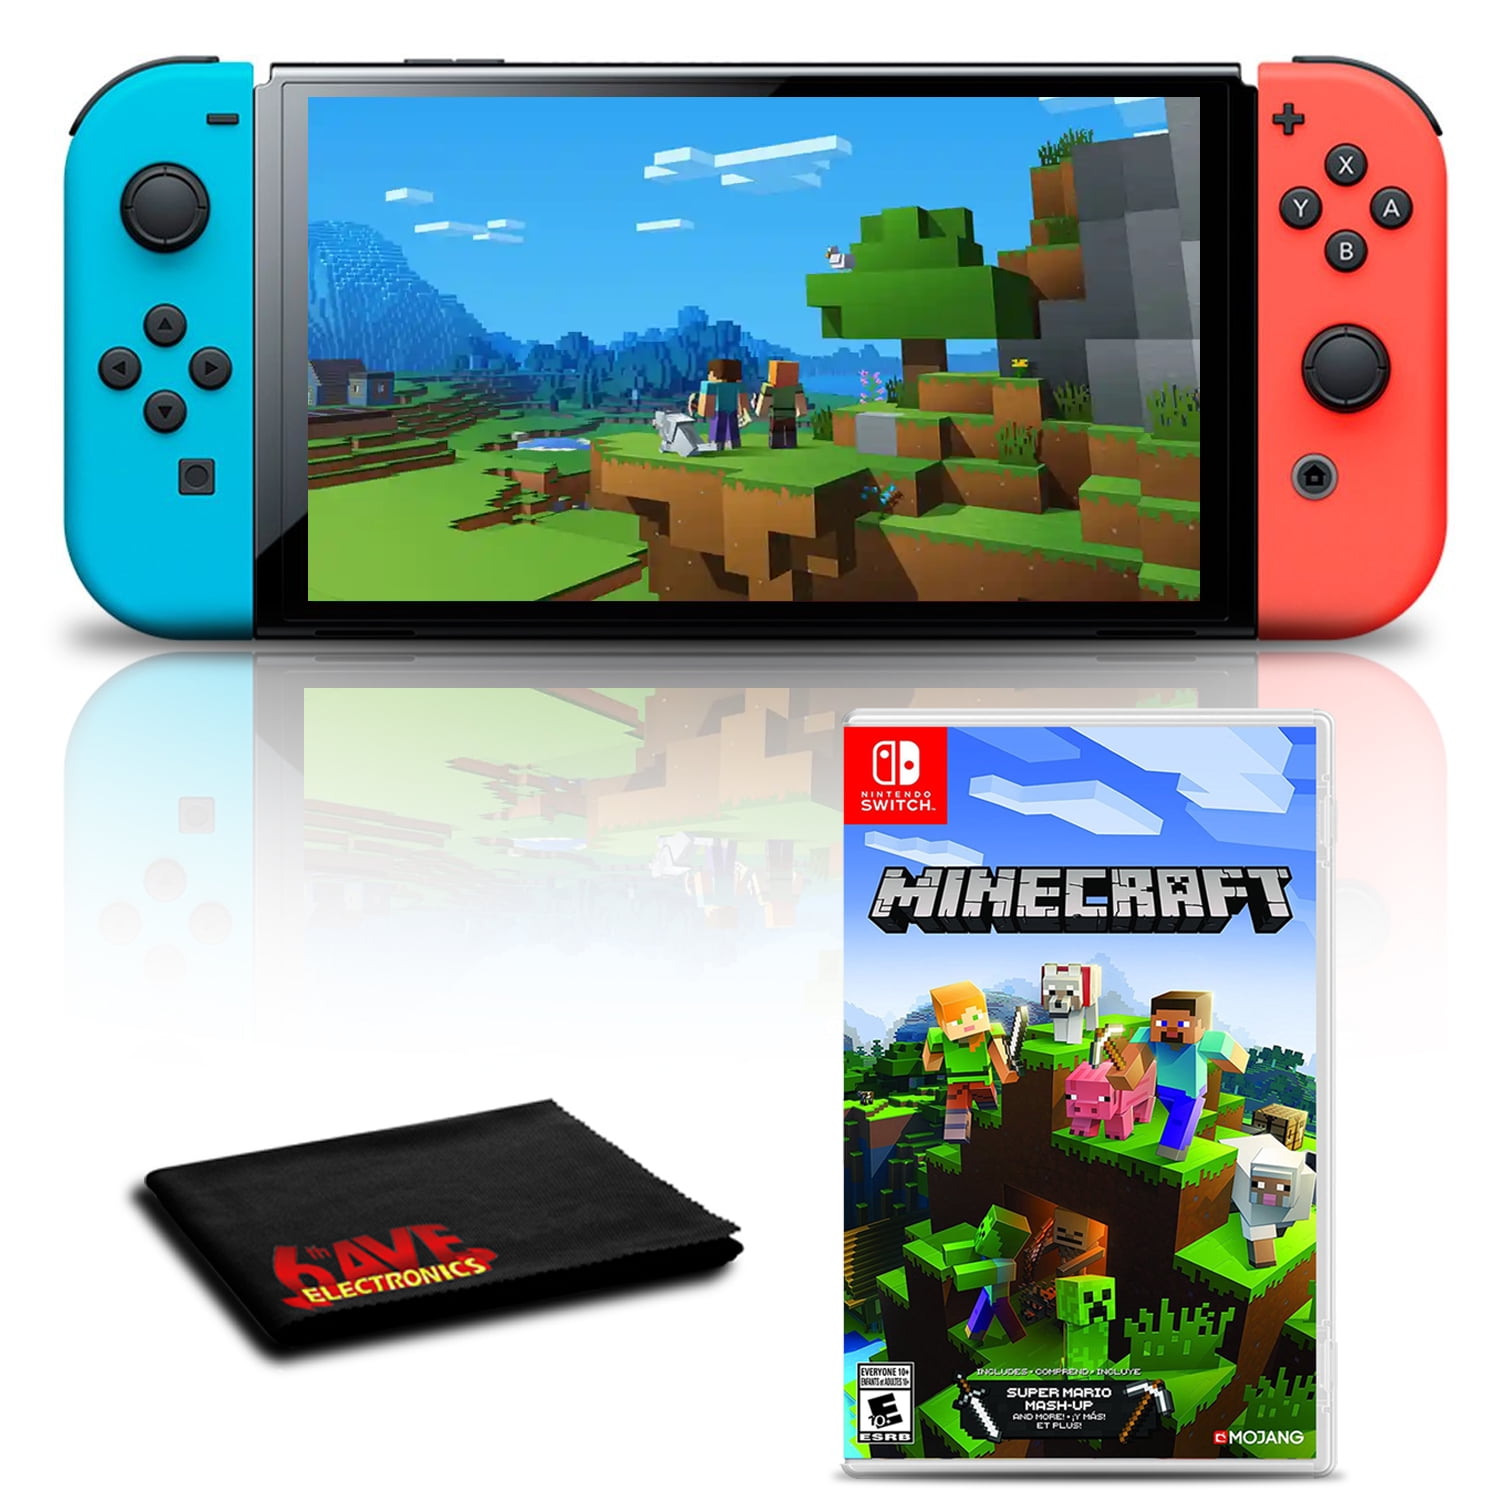 Nintendo Switch OLED Neon Blue/Red with Minecraft Game - Walmart.com